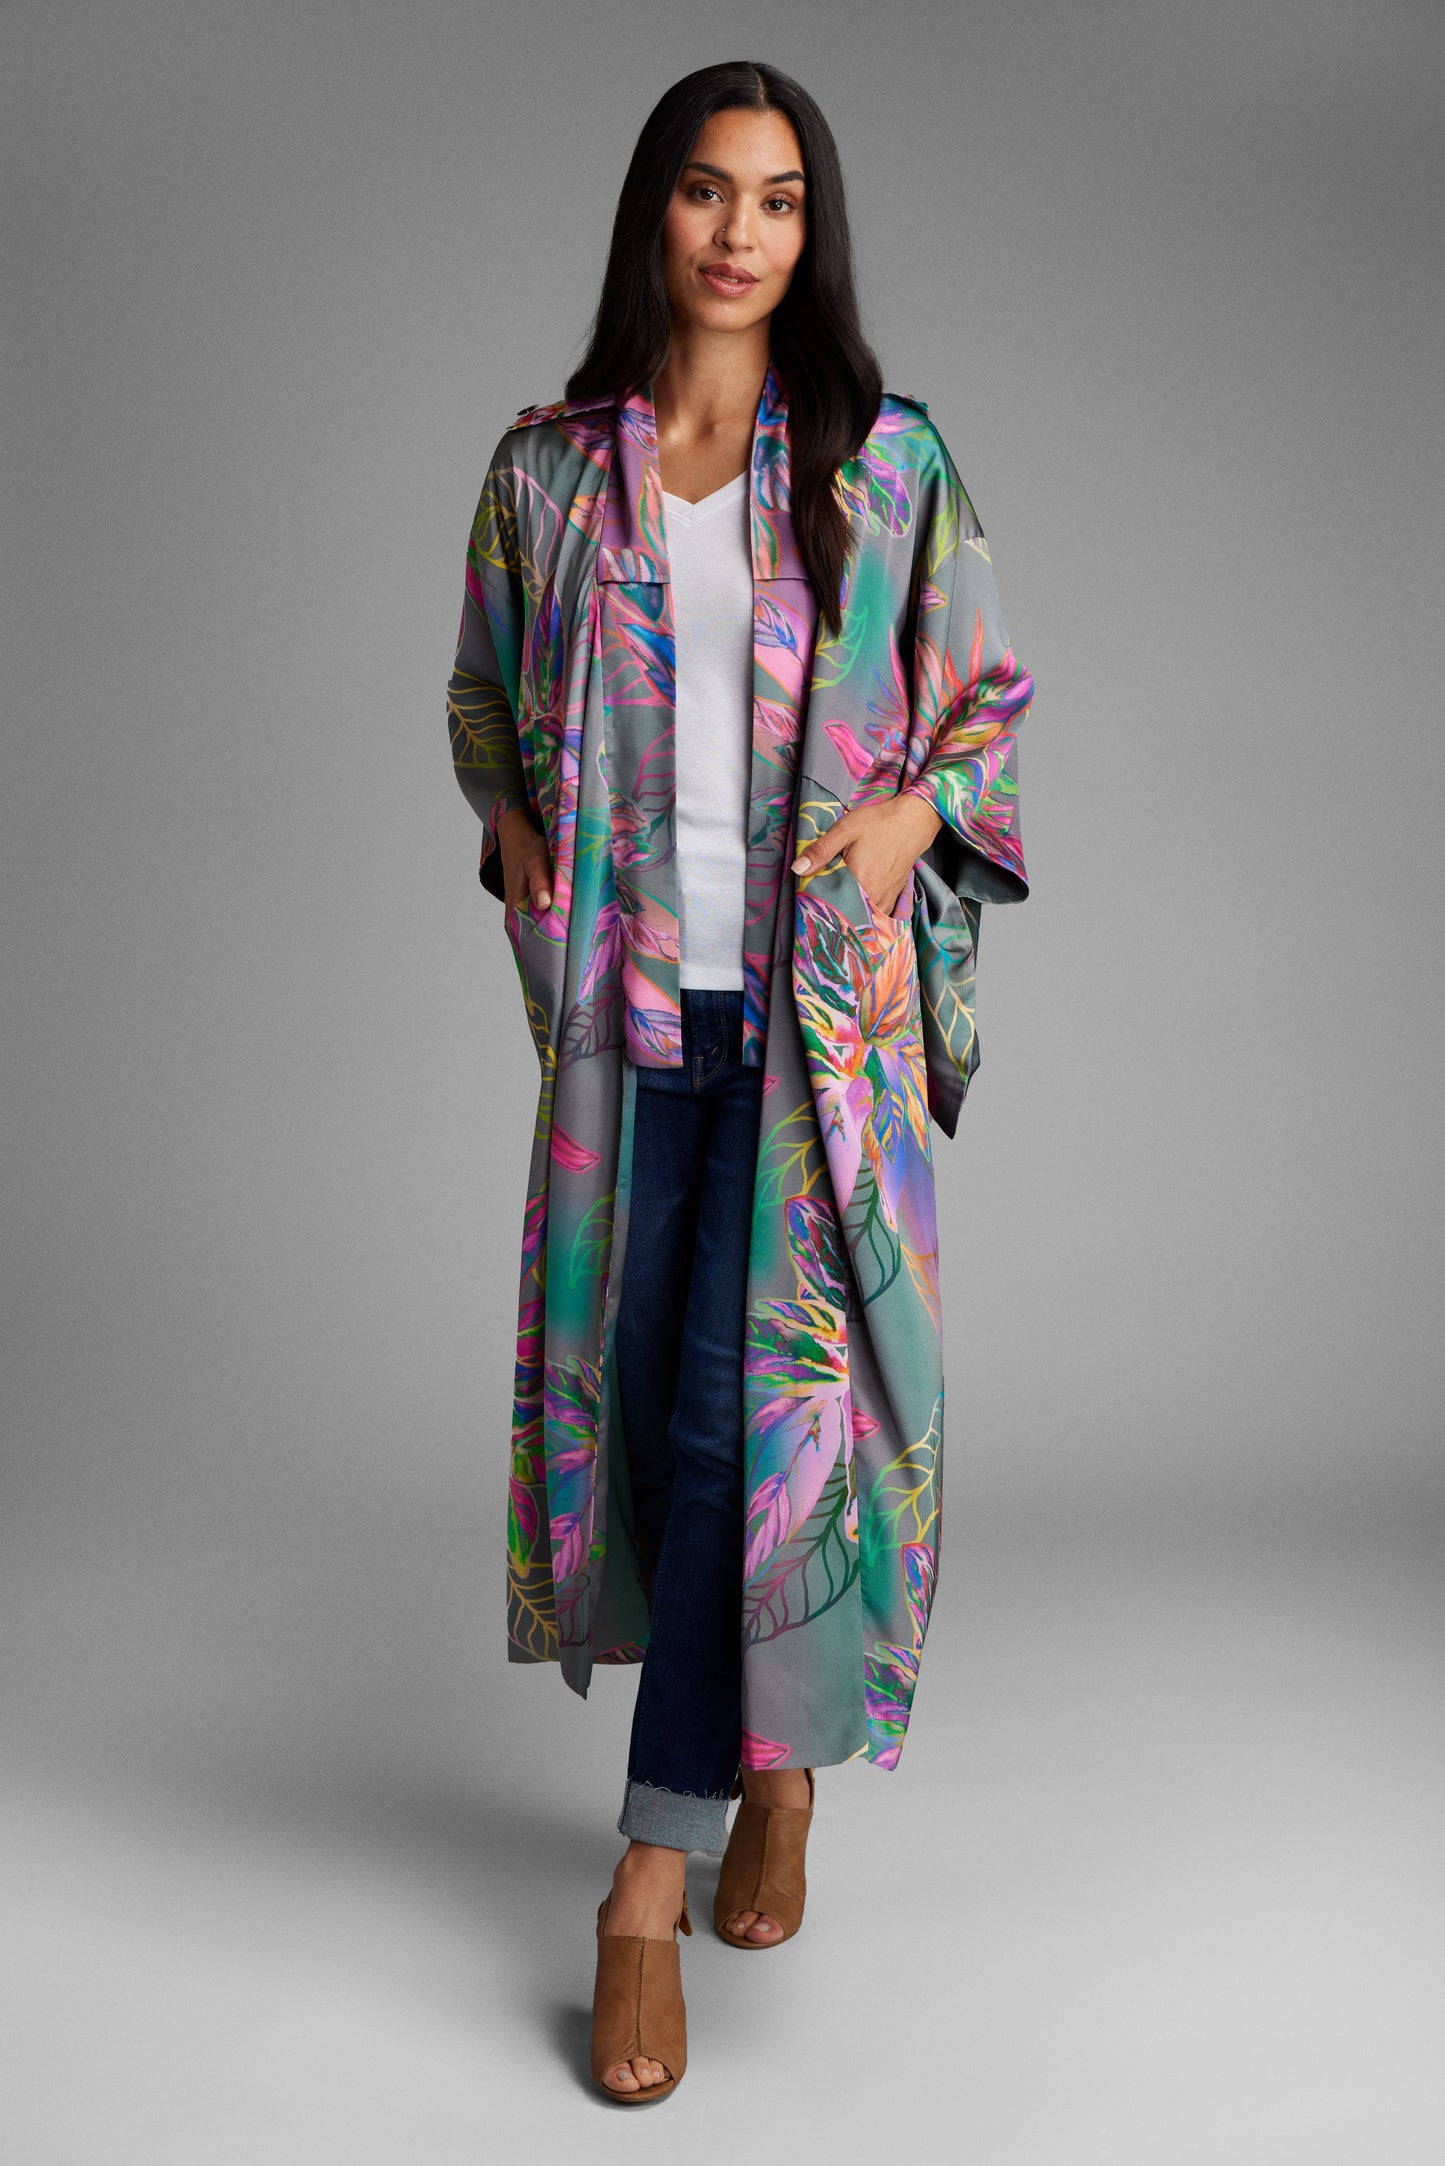 Woman standing with hand in pocket wearing an all over tropical print kimono duster made from recycled materials